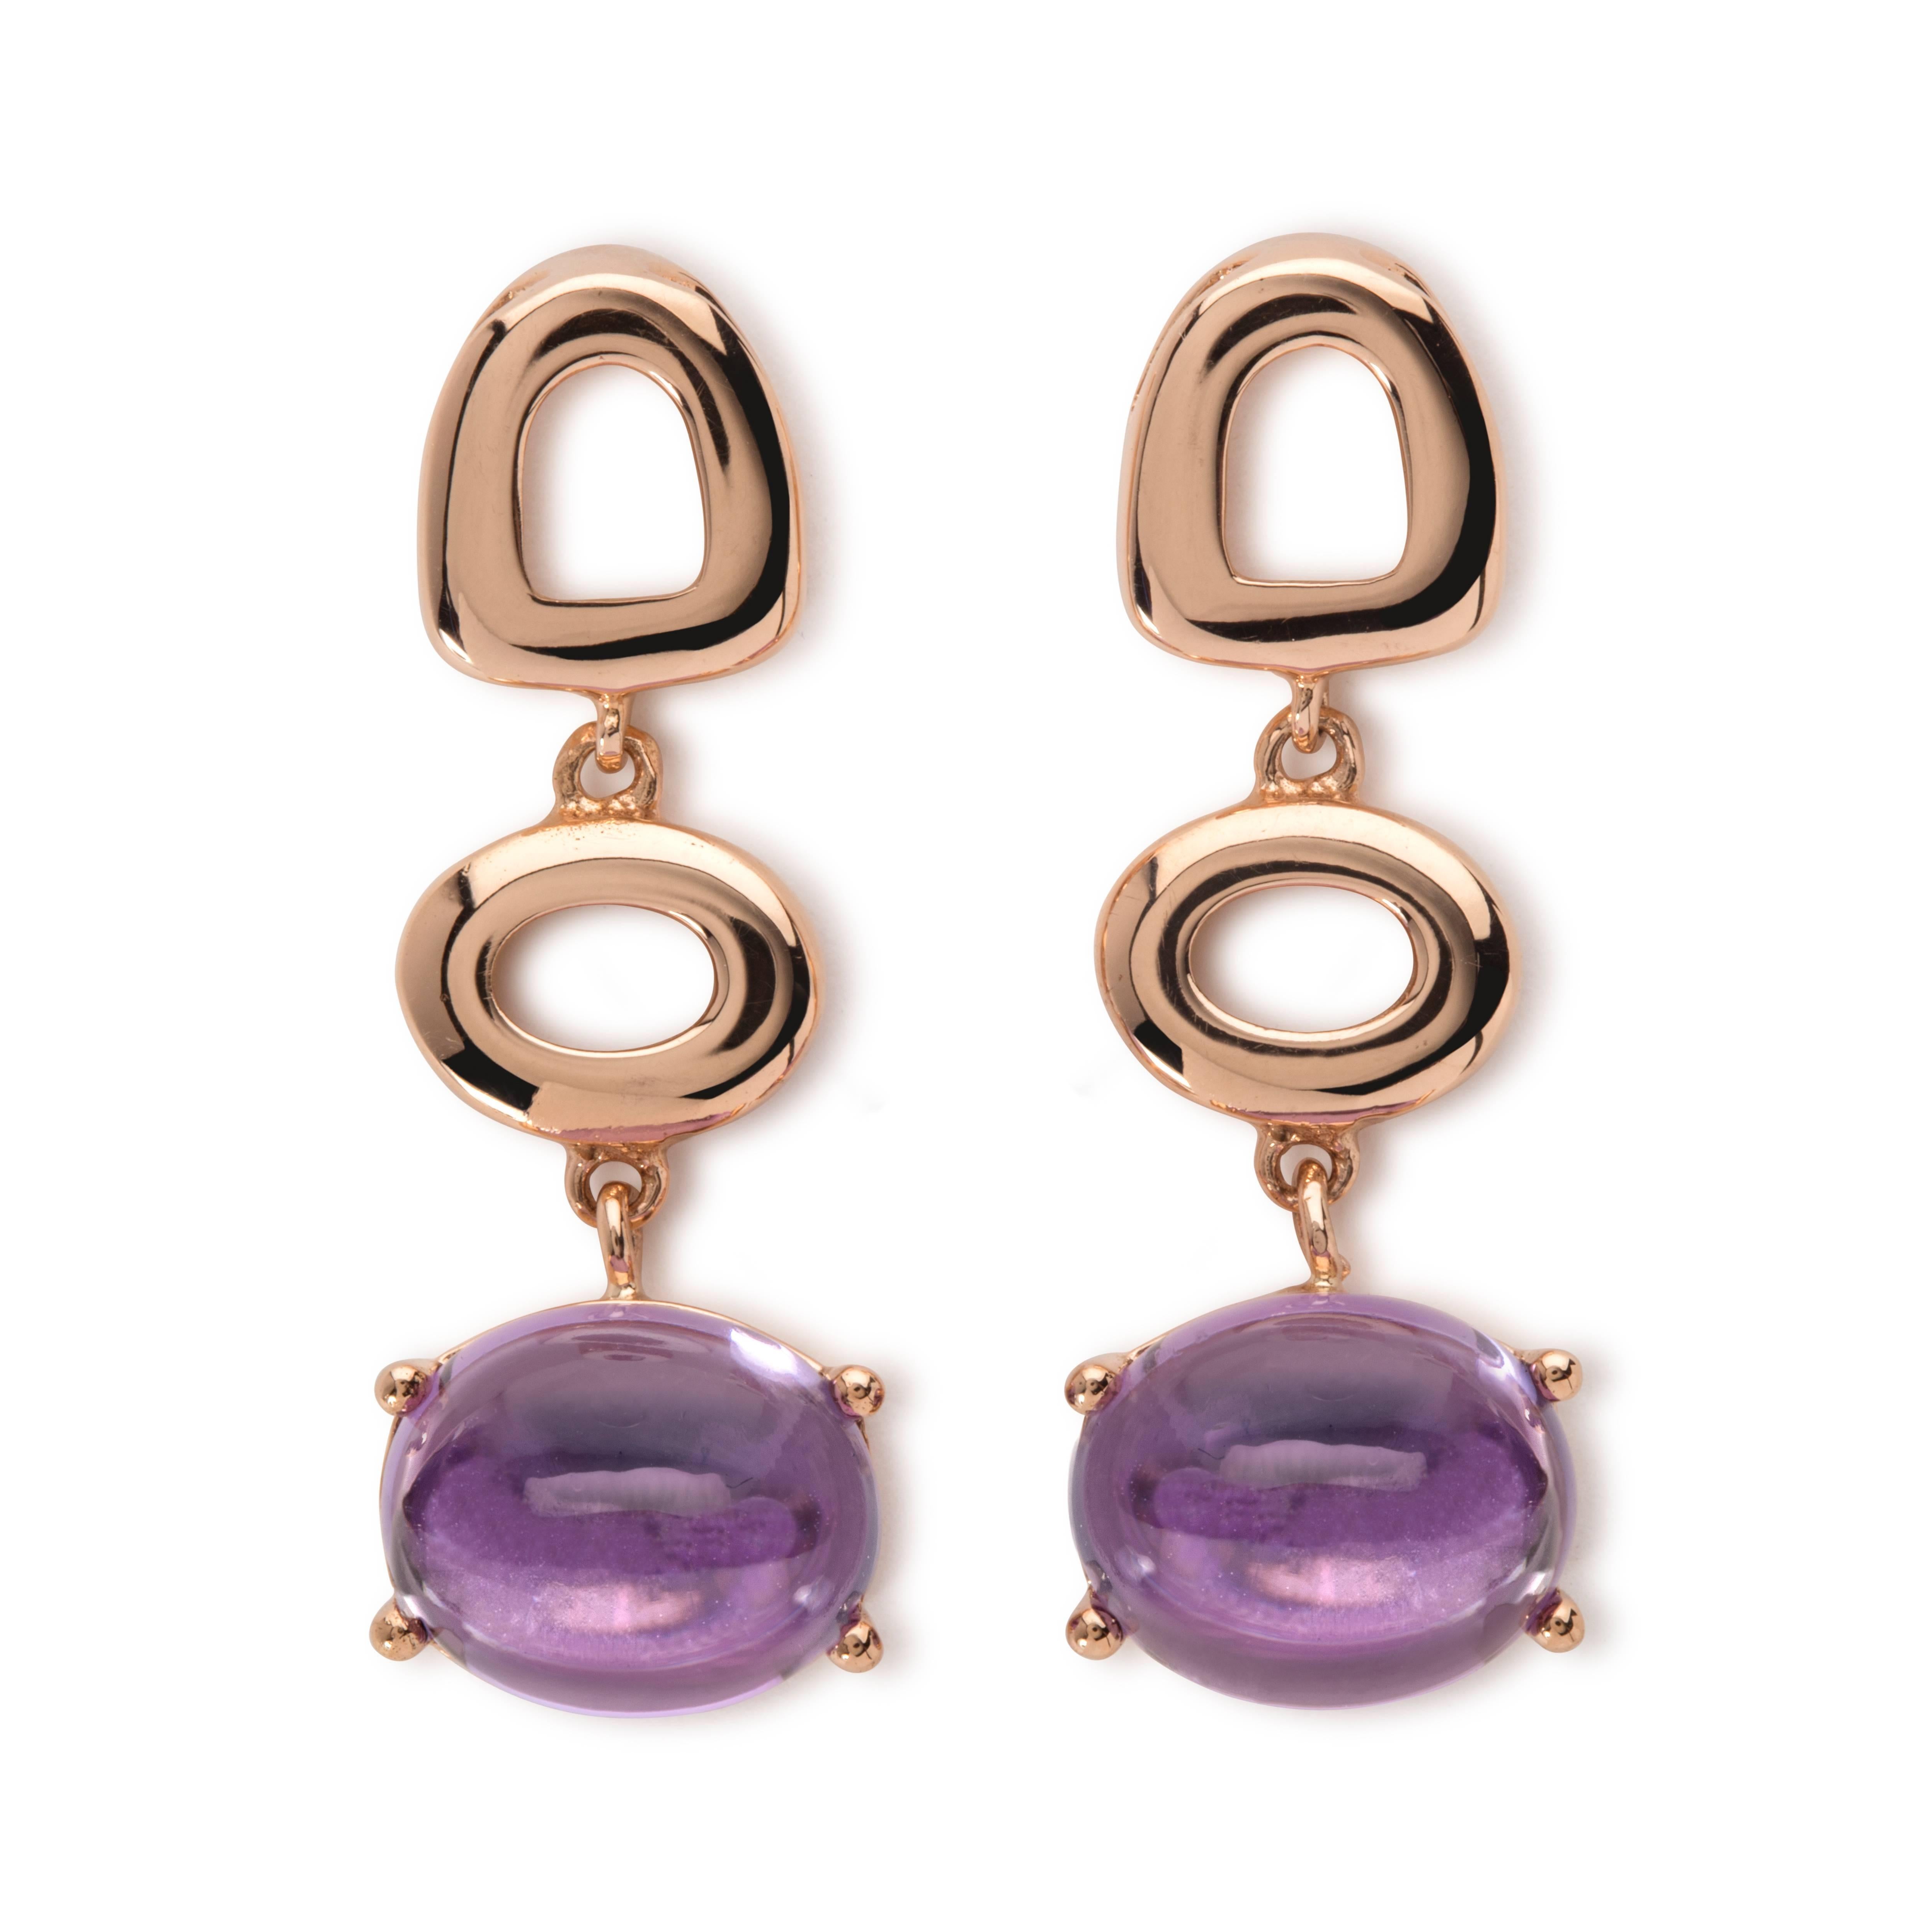 St Tropez
18k solid gold drops, 10x12mm cabochon stone
The name says it all, charisma all the way. These earrings make you feel St Tropez chic. We recommend wearing them as evening wear, to a spectacular event, or just when you want to feel über